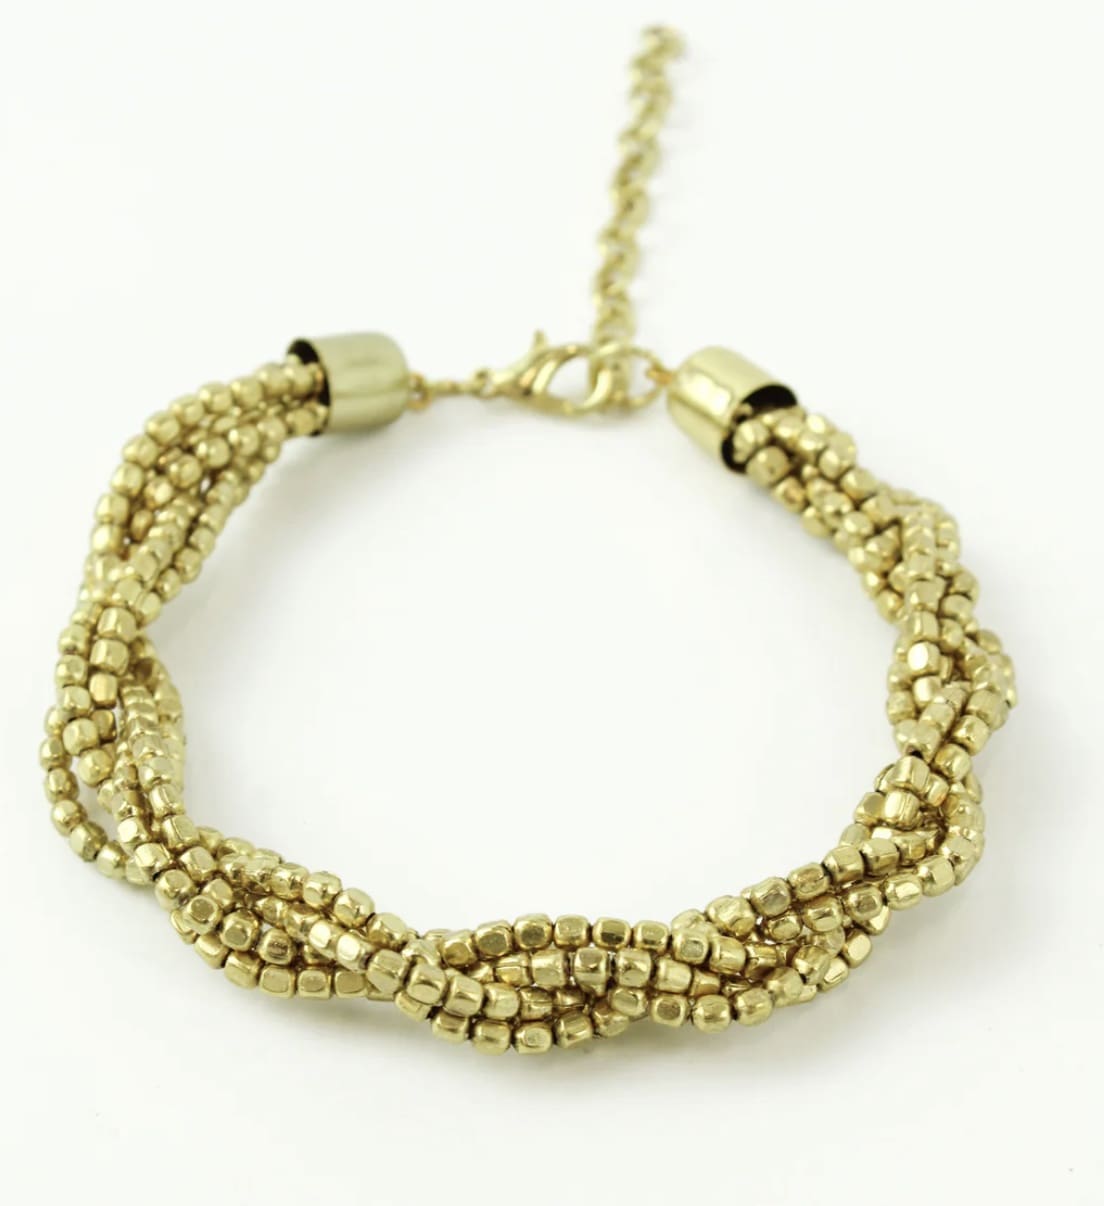 A gold bracelet with a chain.